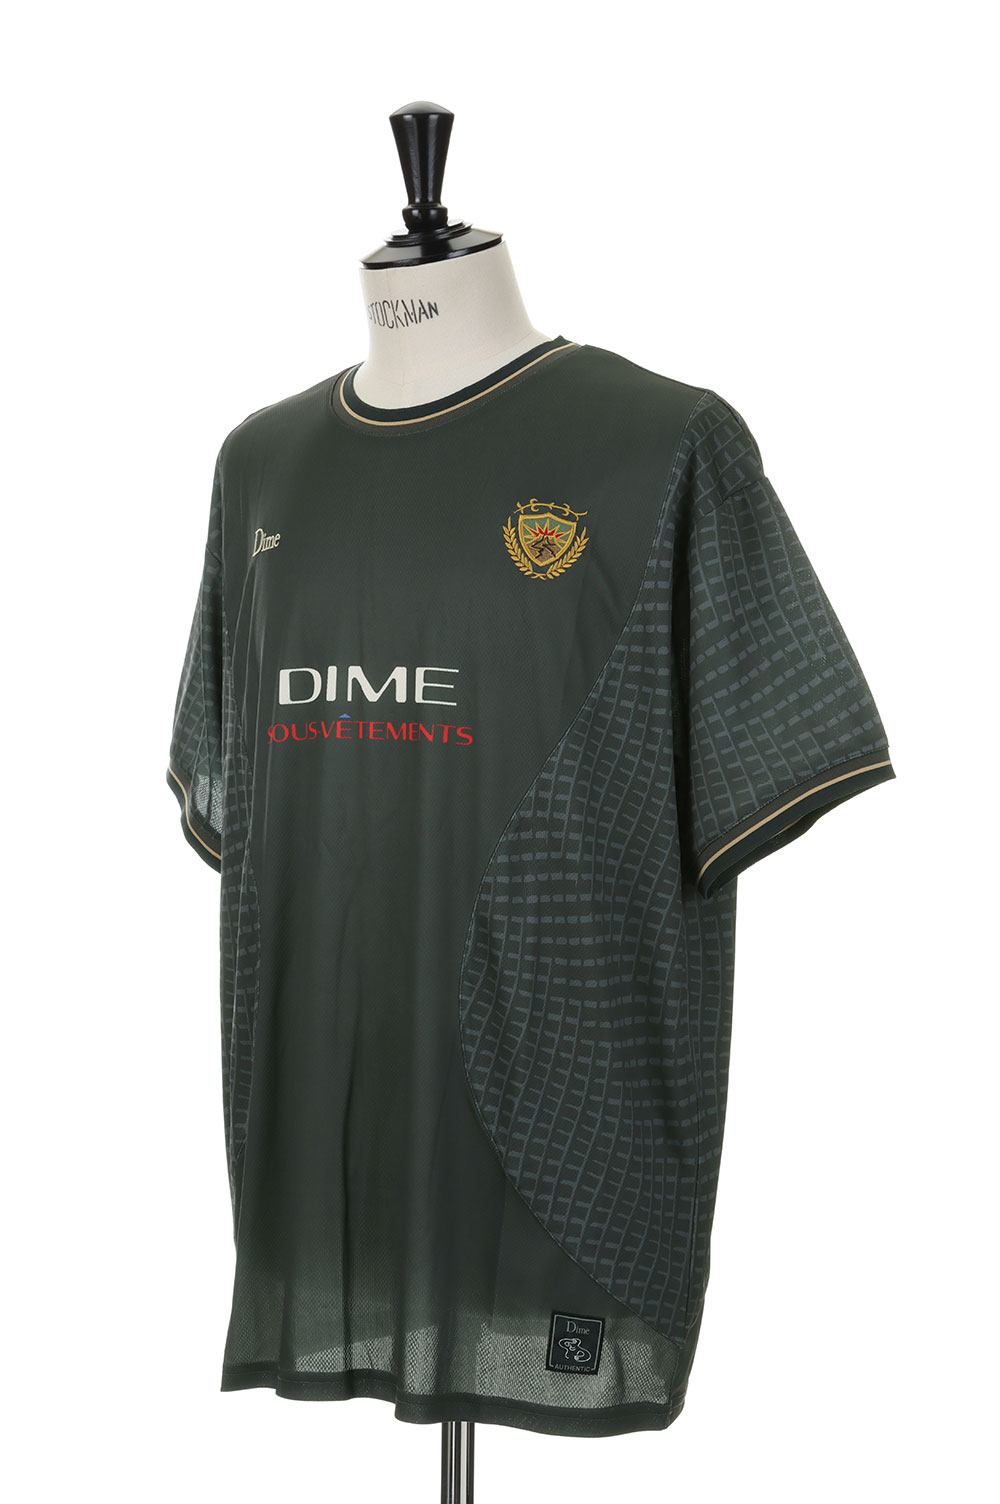 DIME ATHLETIC JERSEY CHARCOAL-